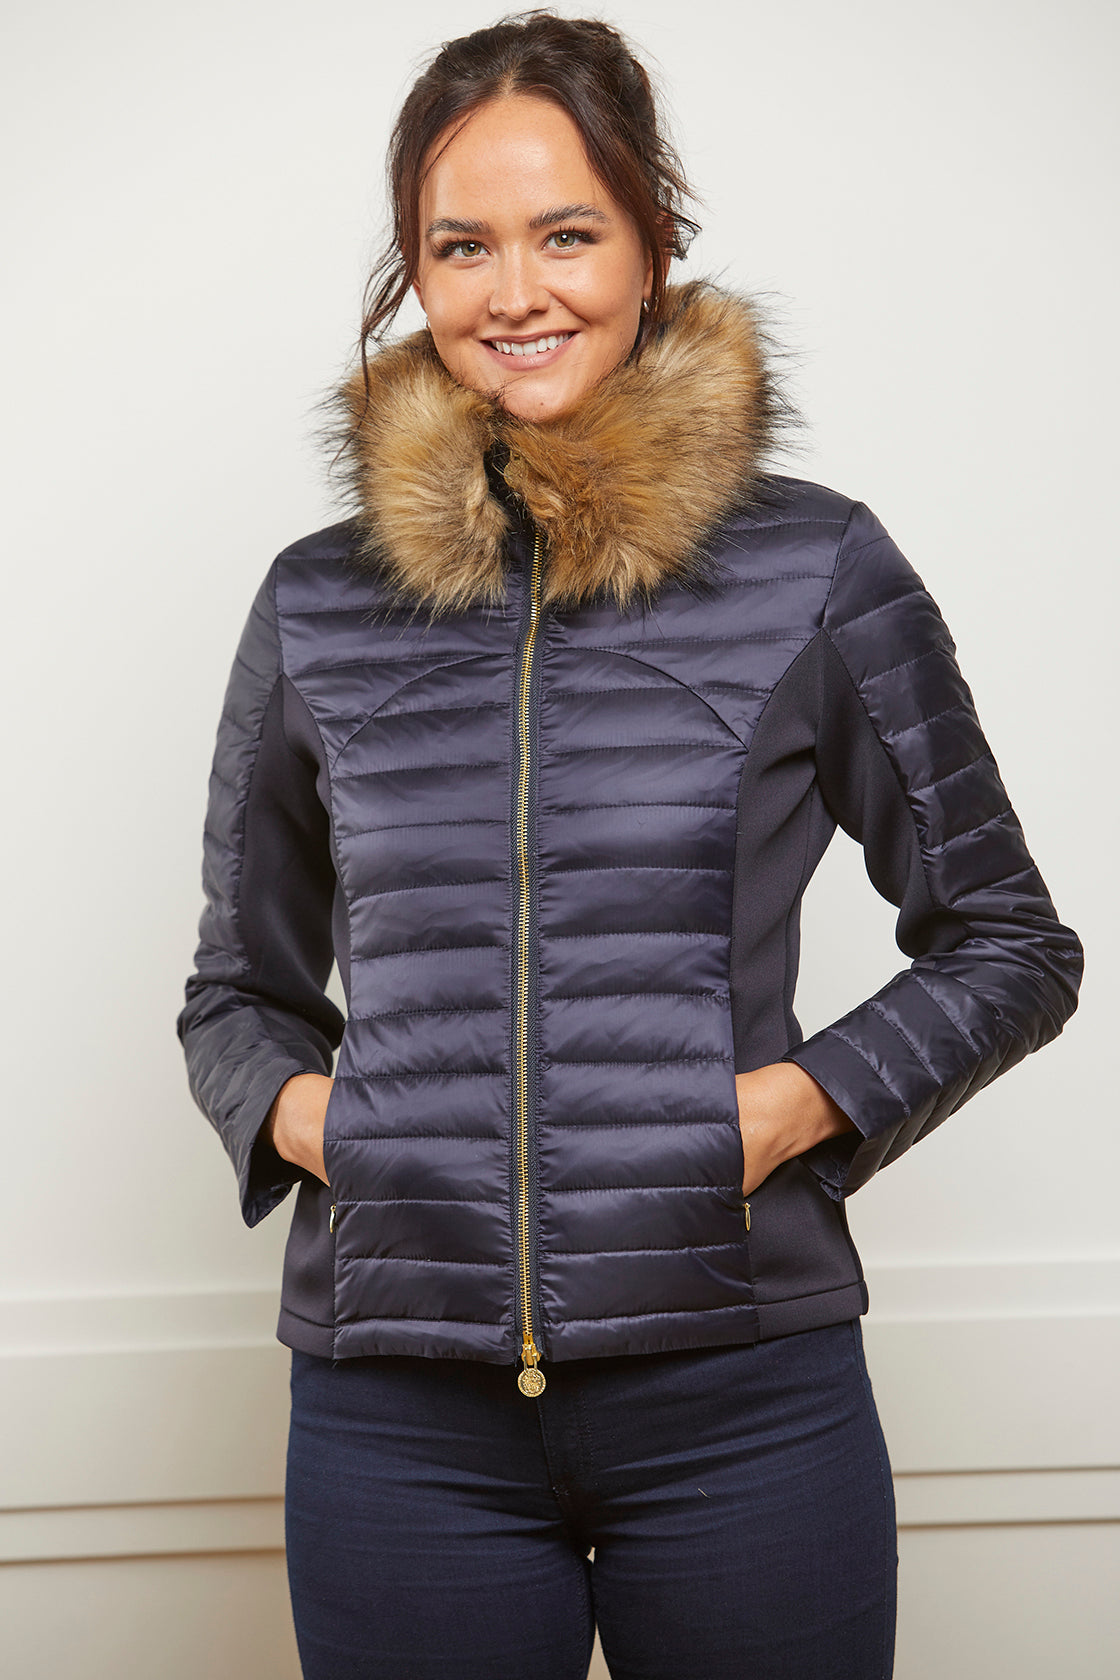 Navy down puffer jacket with gold zip and stretch side panels and detachable faux fur collar.